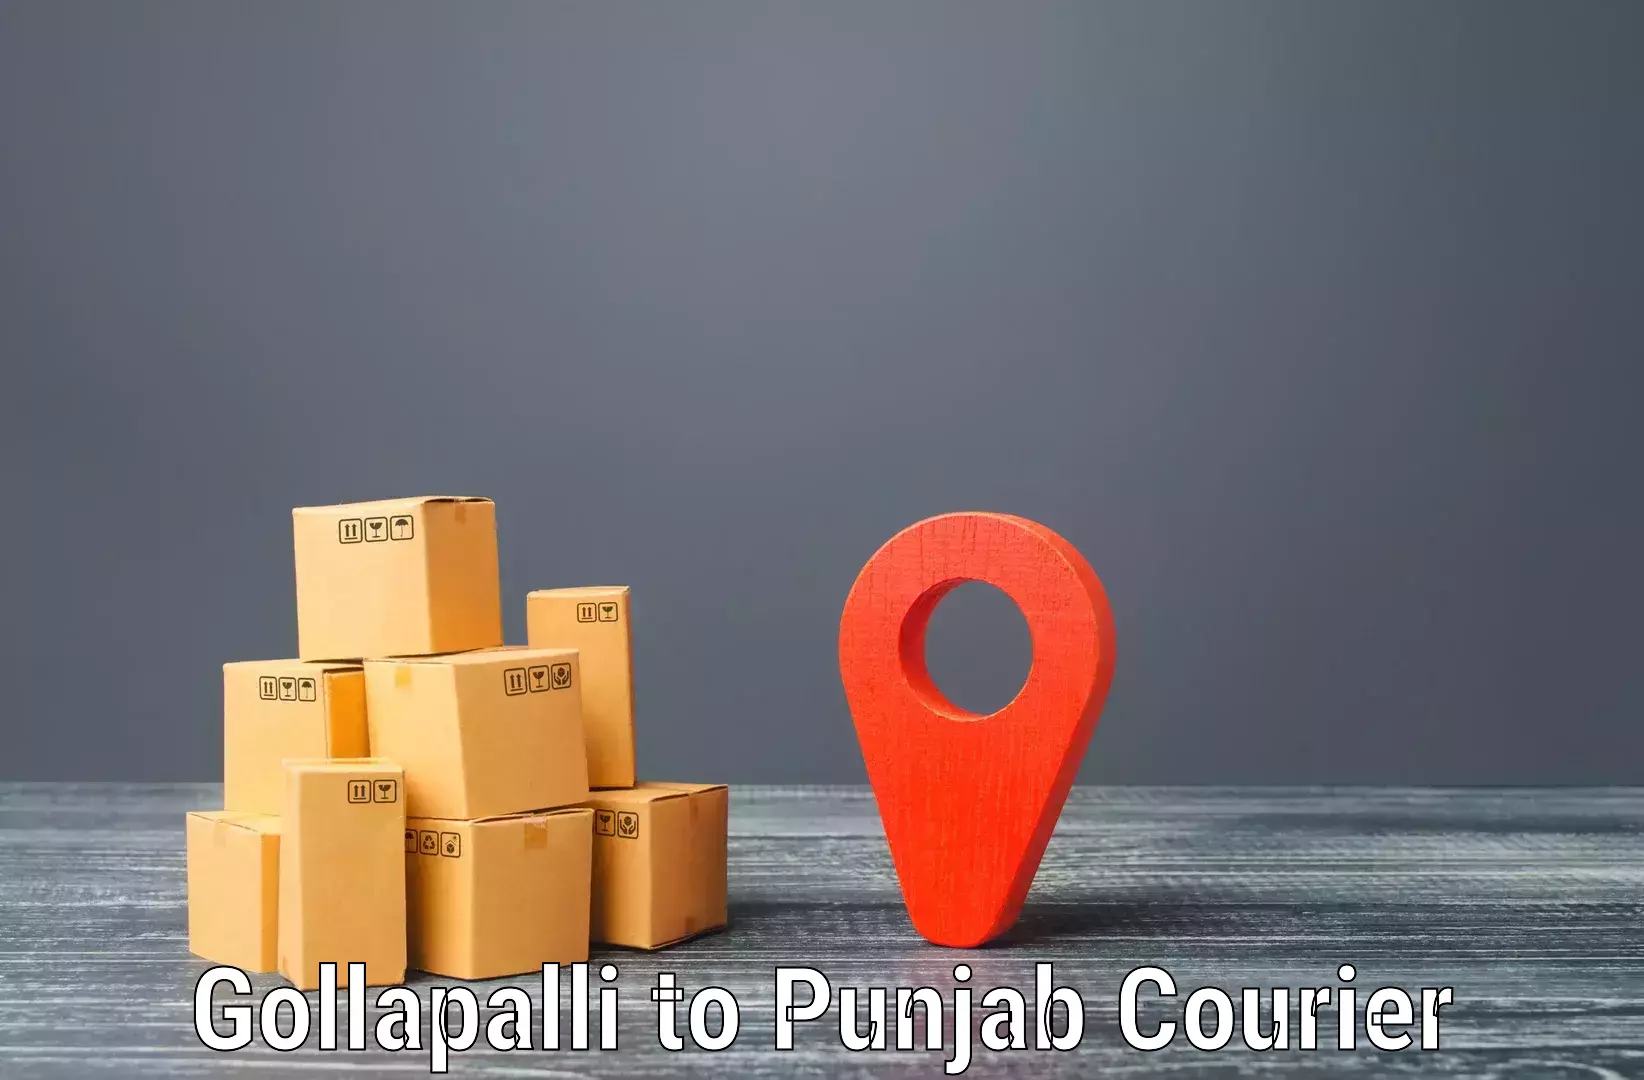 Global shipping networks Gollapalli to Abohar